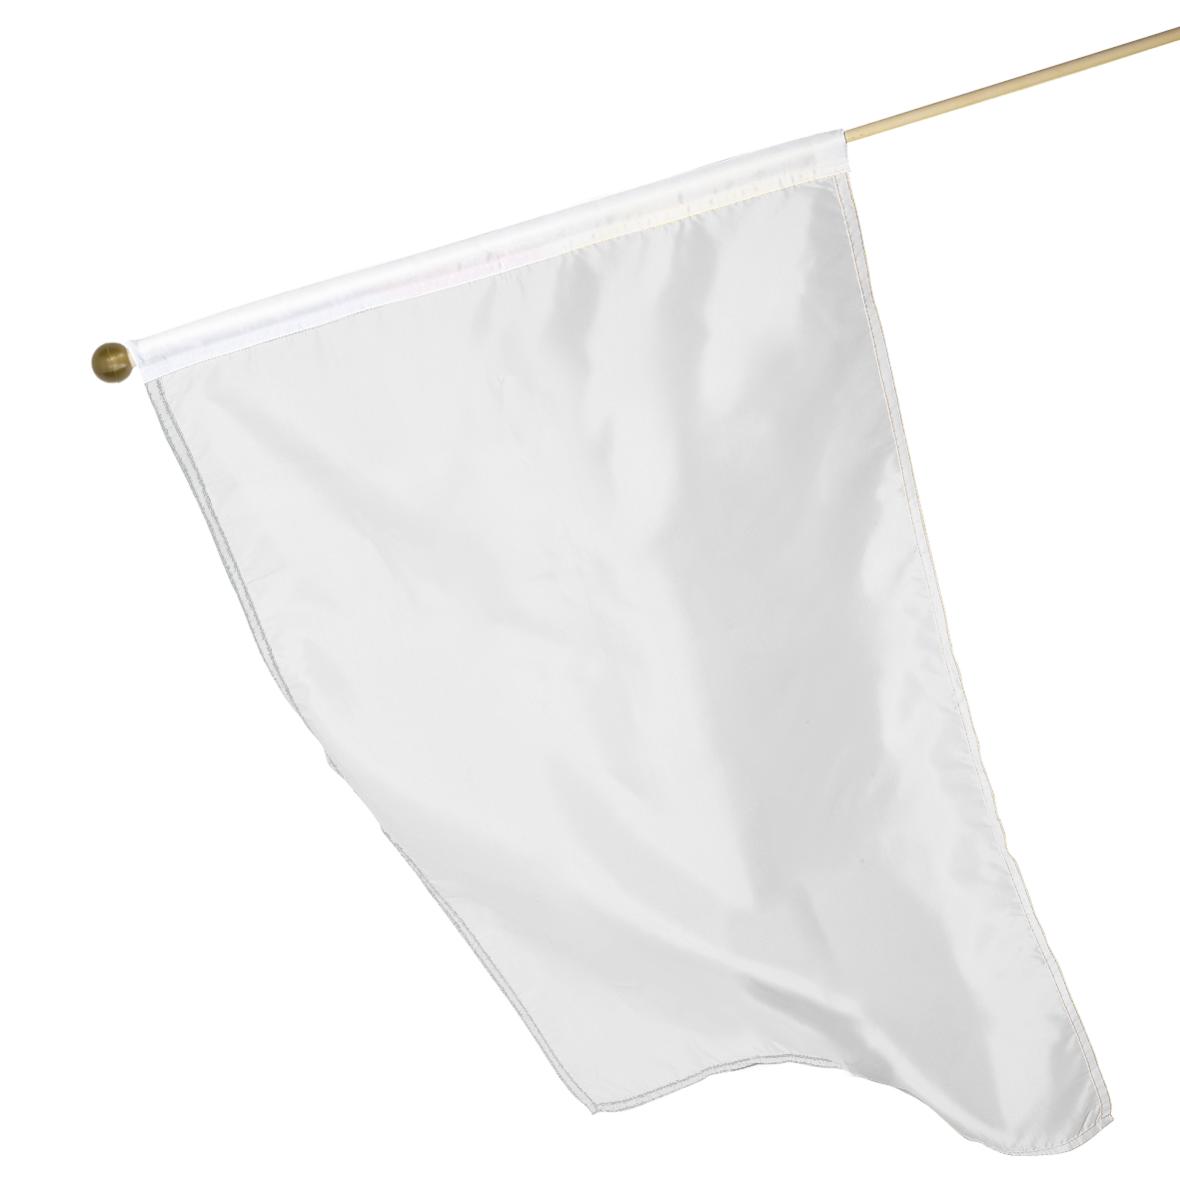 White flag with sublimation print and a wooden stick - Oxenholme